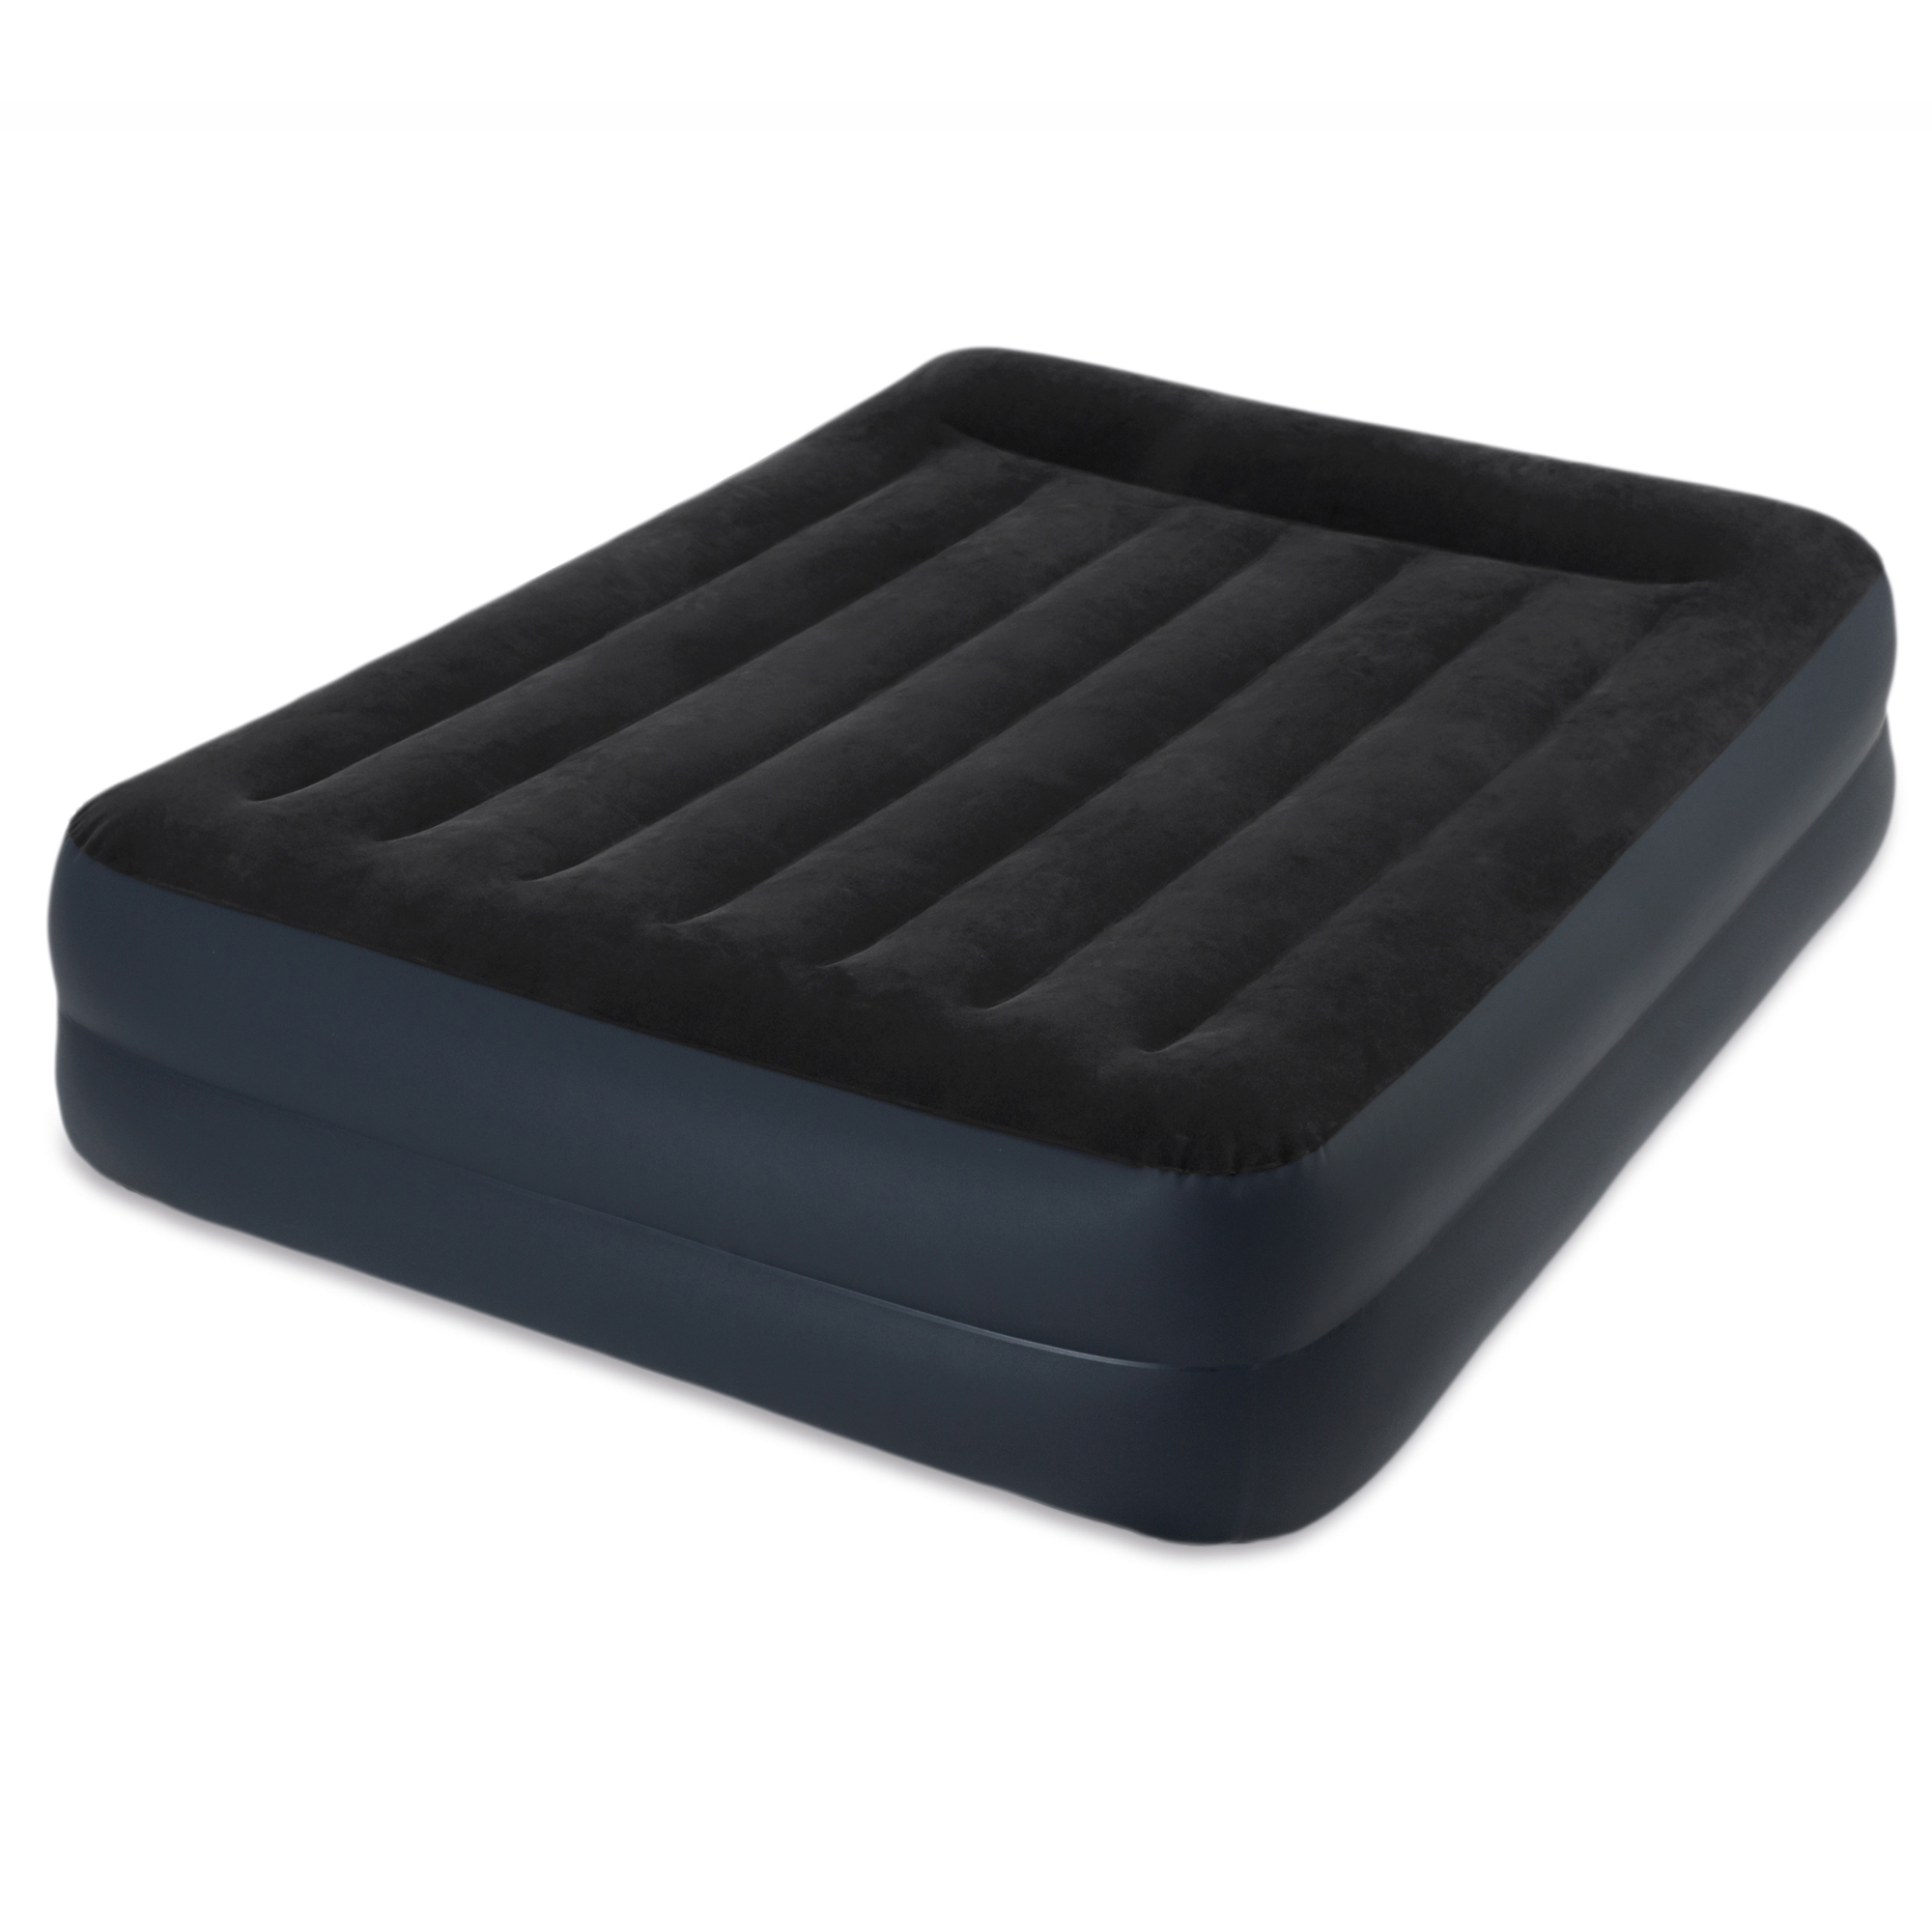 Intexrec Queen Pillow Rest Raised Airbed